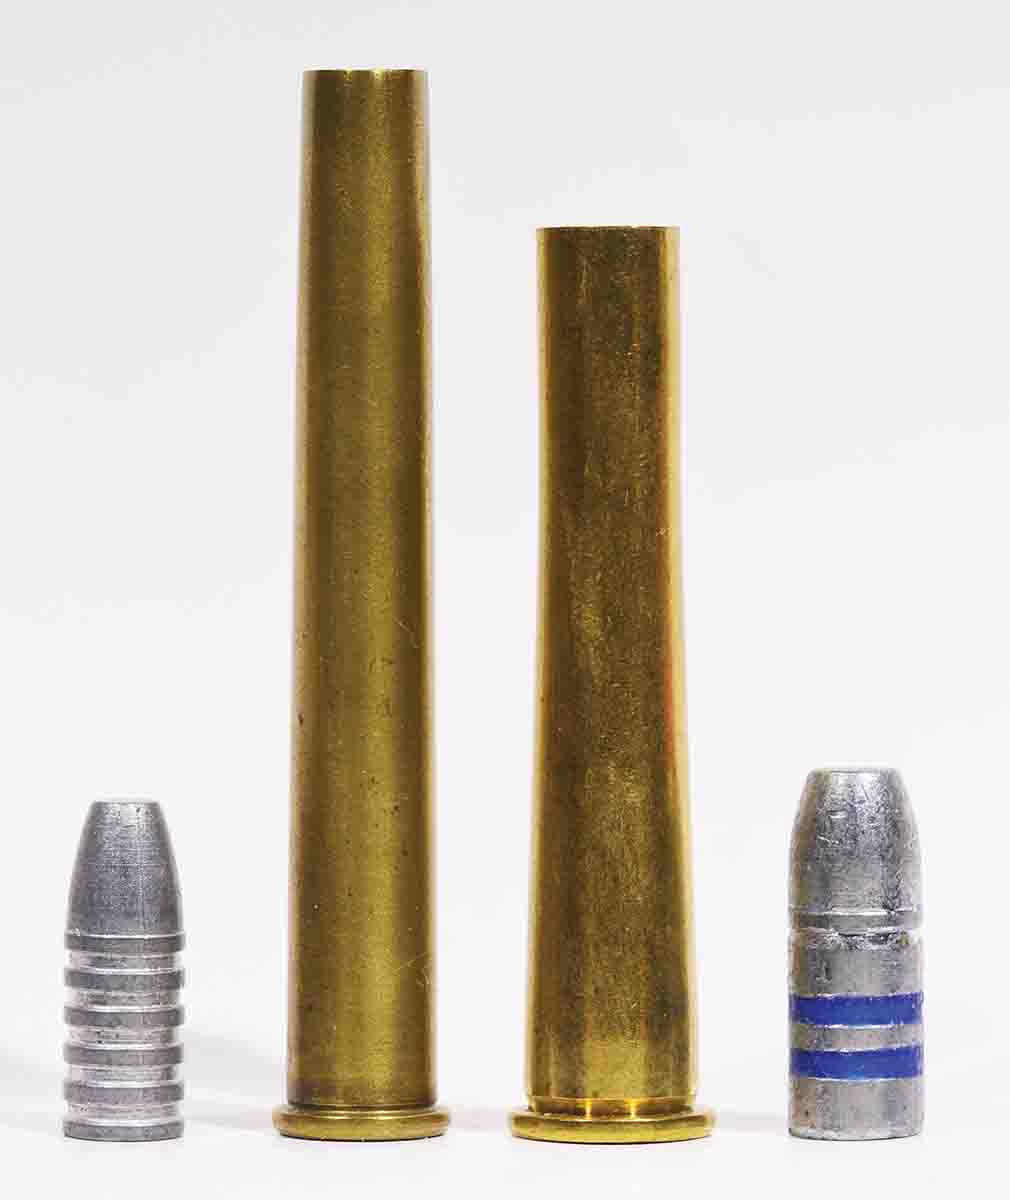 The .28-30-120 typically used a 120- grain bullet, while the larger .32-40 used a 170-grain bullet. With its lighter recoil, the .28-30 was expected to unseat the .32-40 among target shooters, just as the .32-40 had done to the earlier .38-55, but it came along too late.